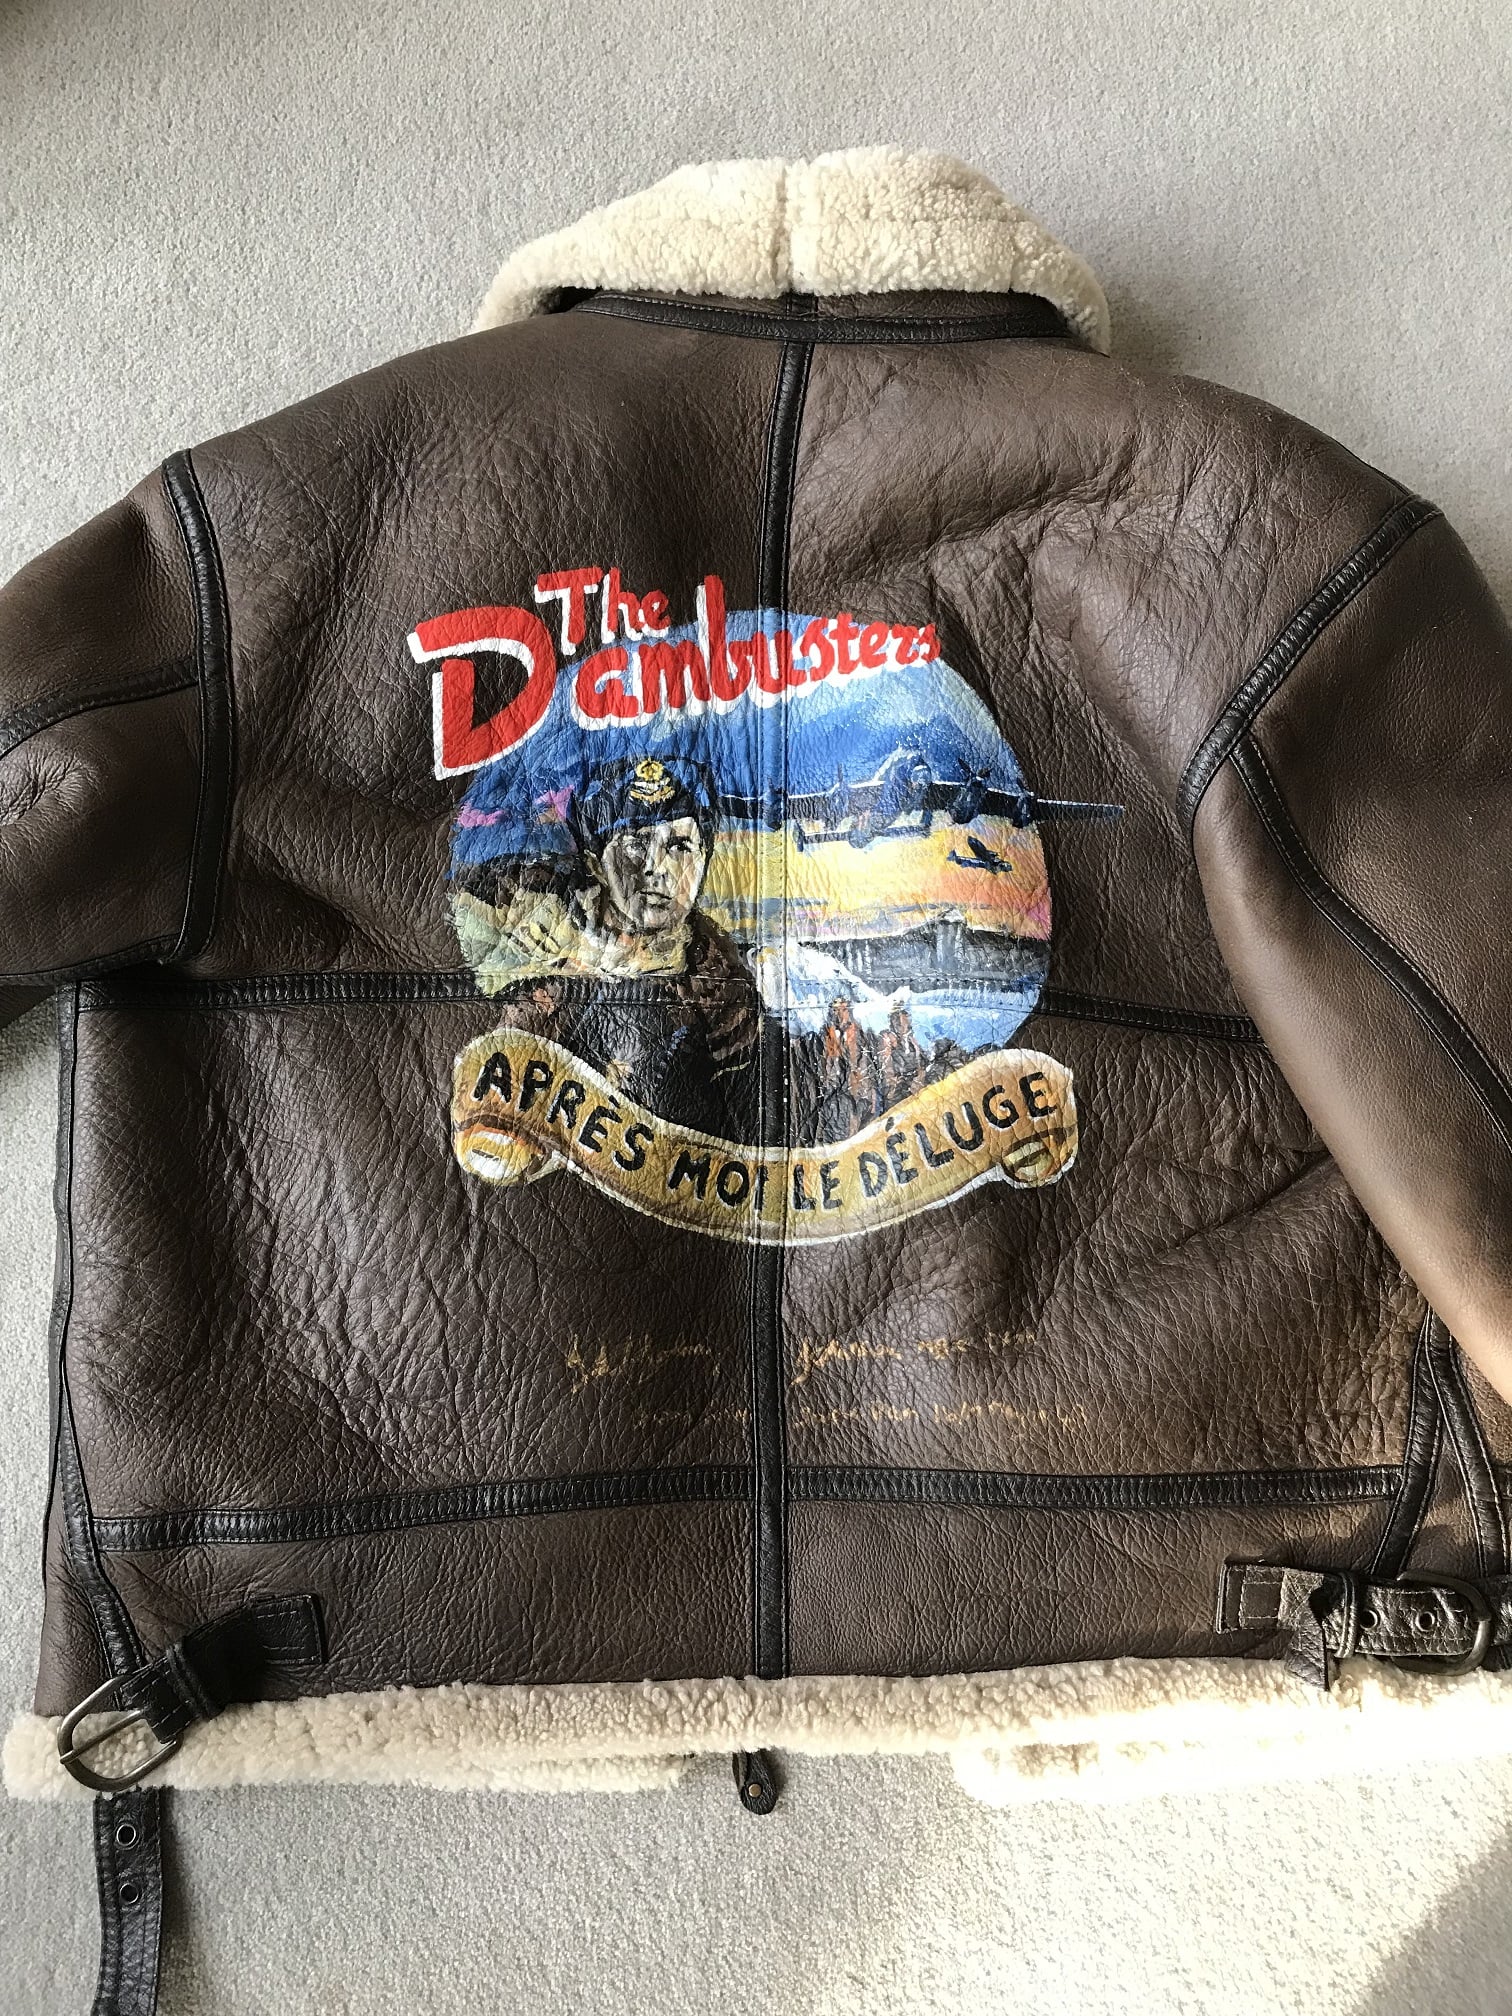 Bomber jacket included in the online auction